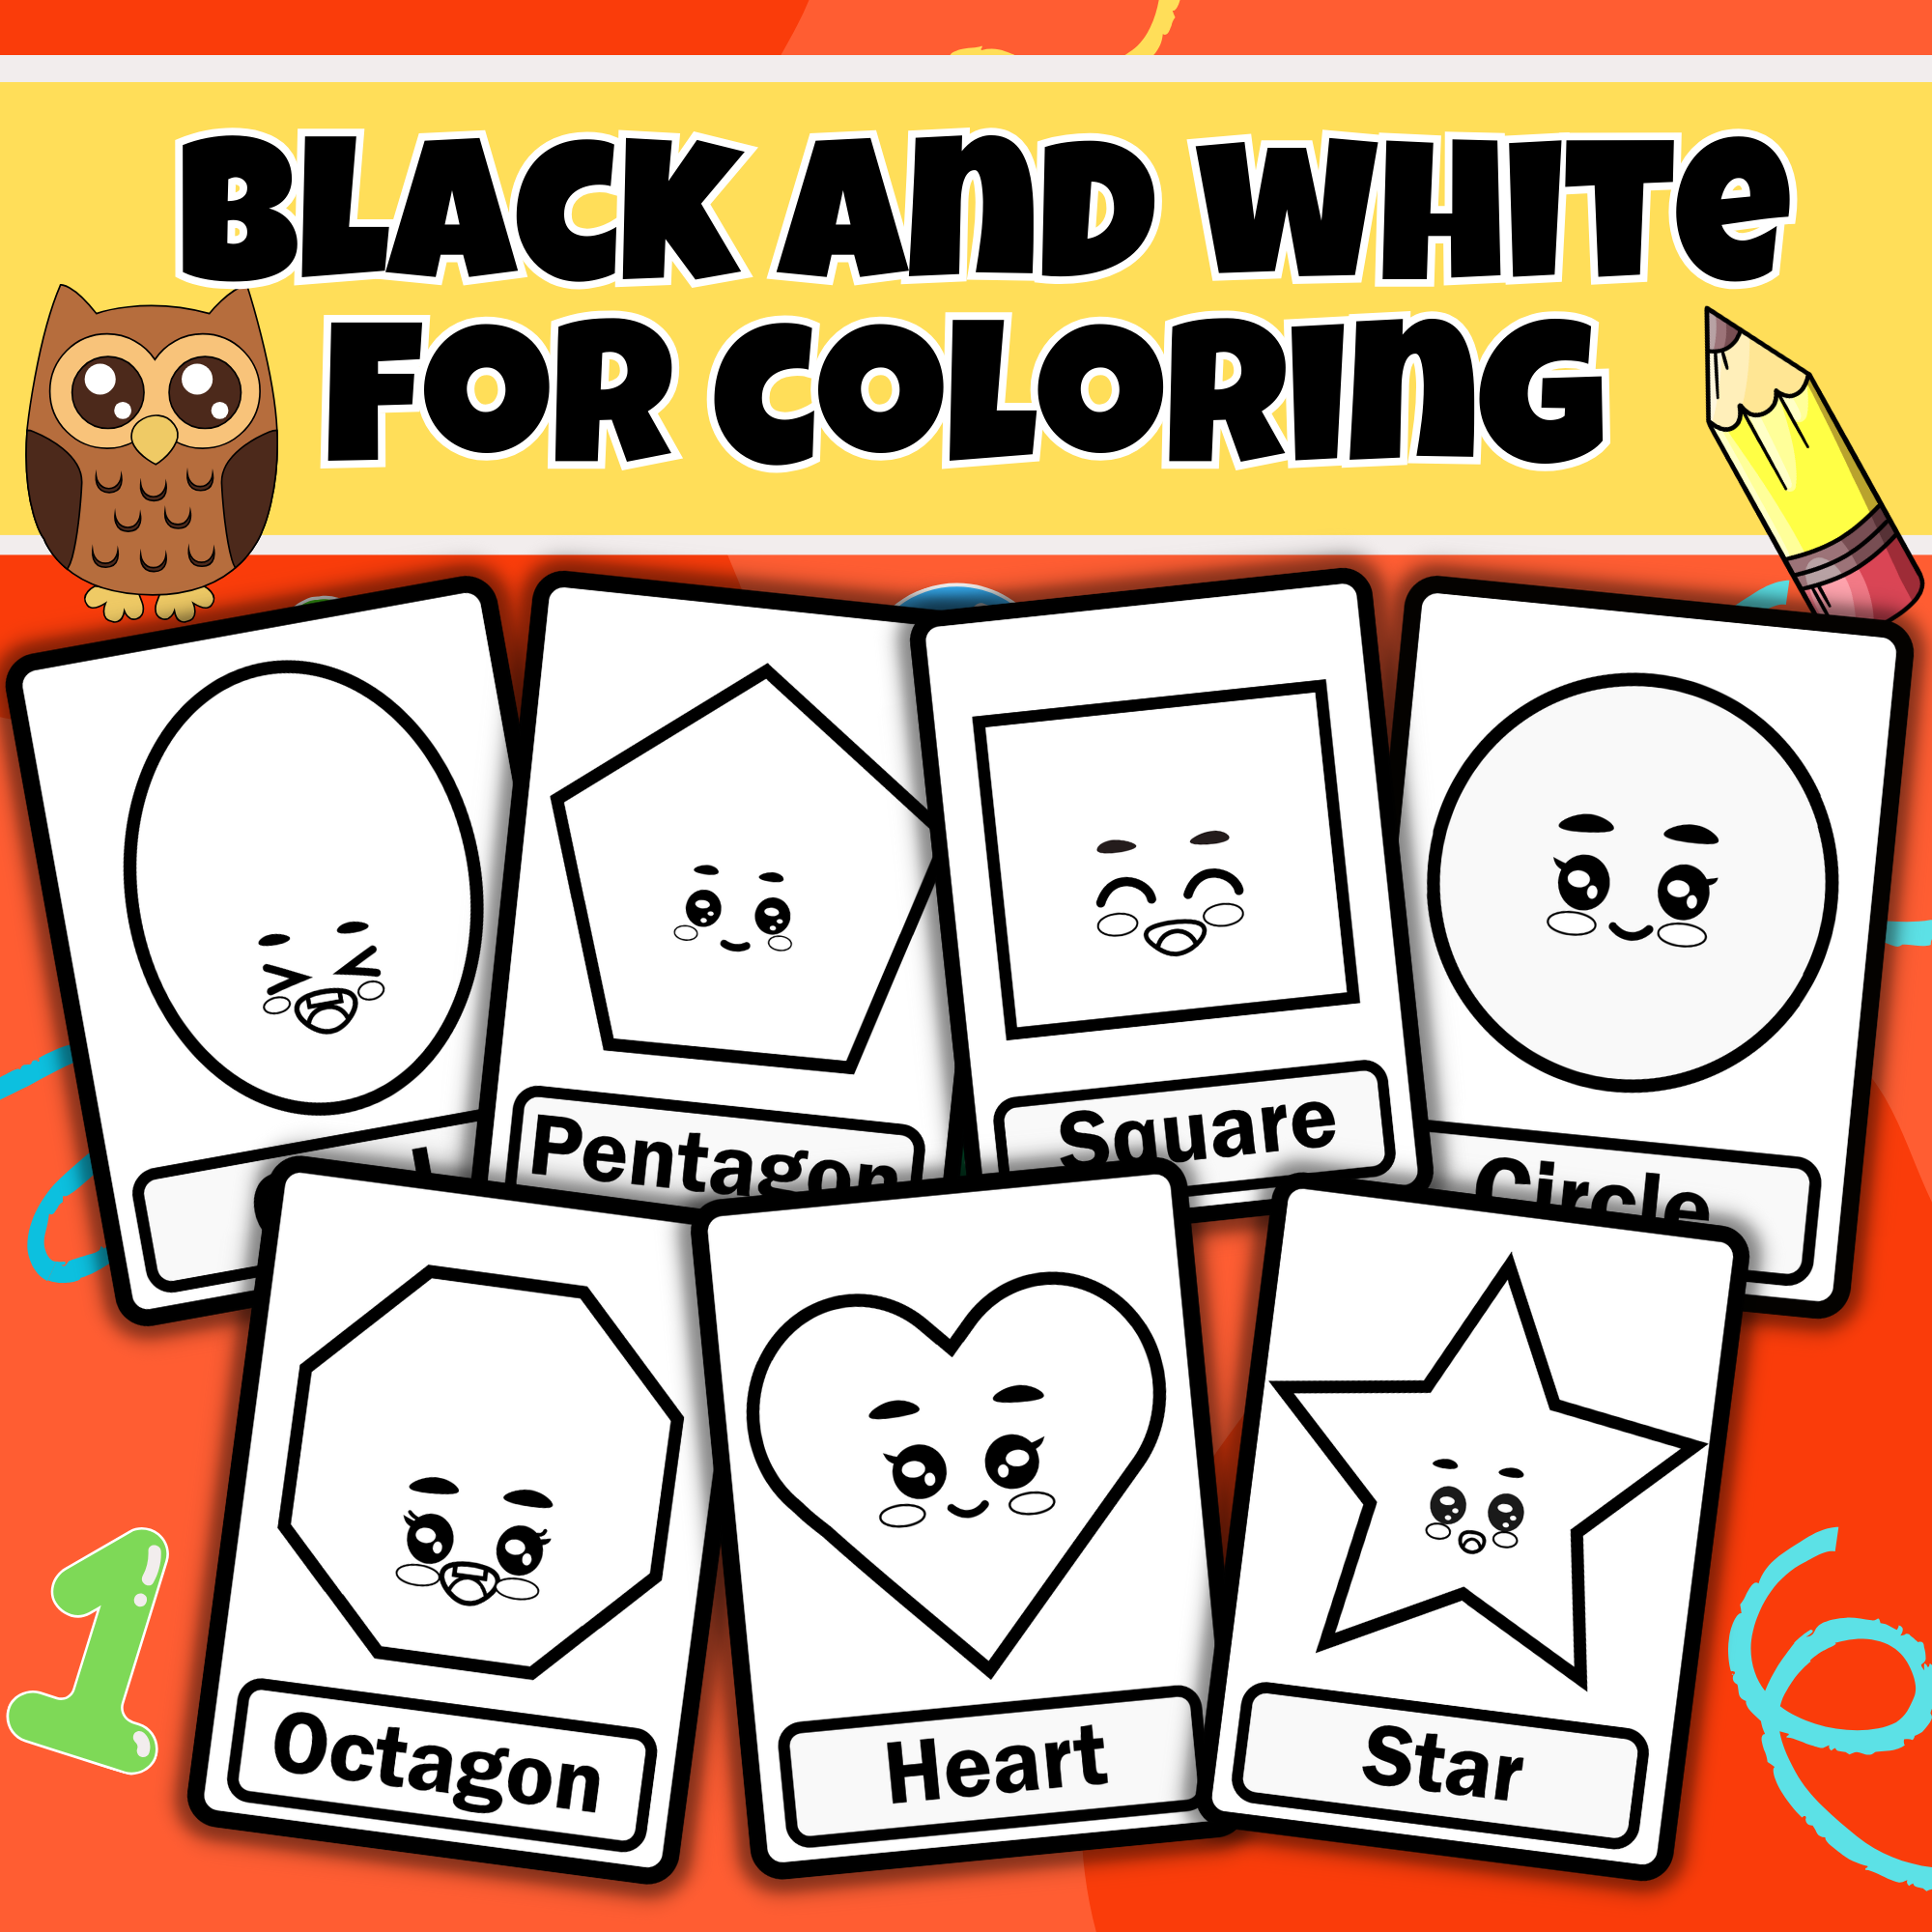 Basic shapes flash cards and posters coloring and tracing cards made by teachers